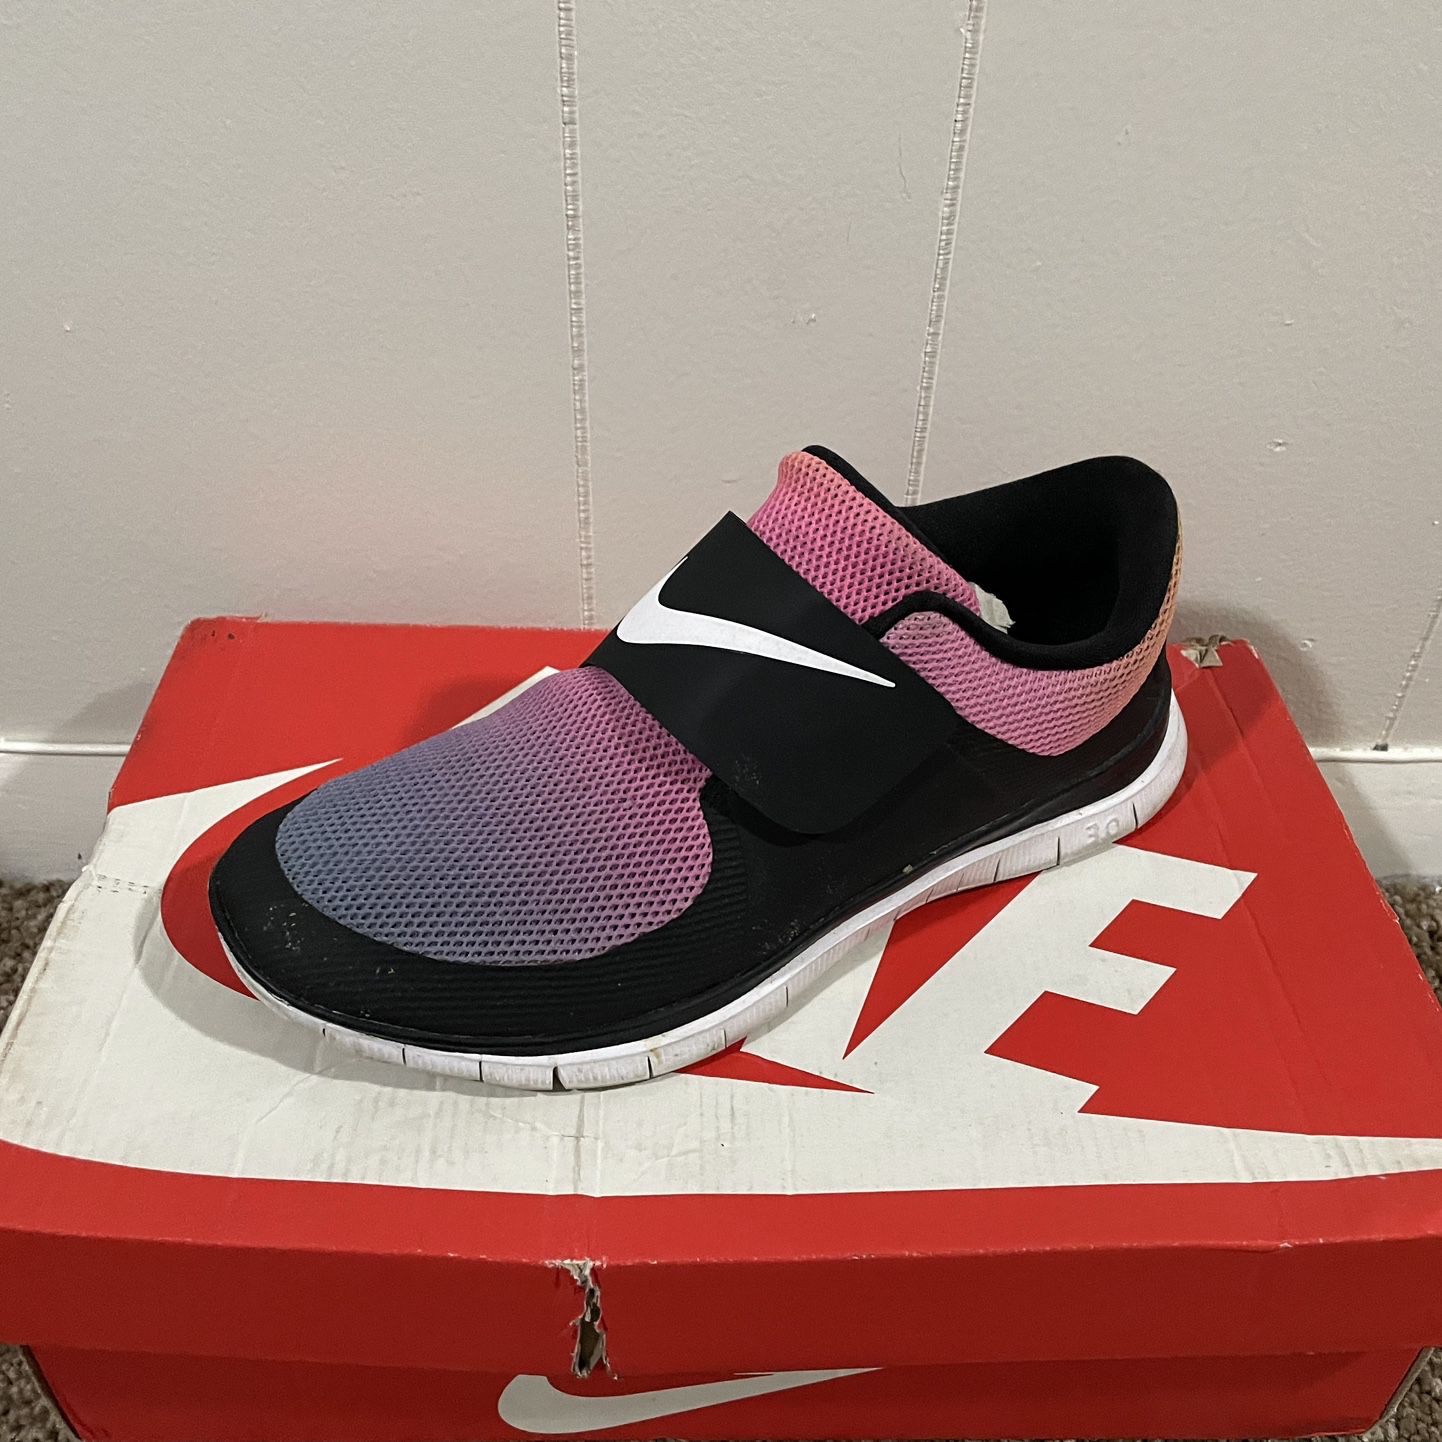 NIKE FREE SOCFLY SD 6 for Sale in Germantown, MD - OfferUp